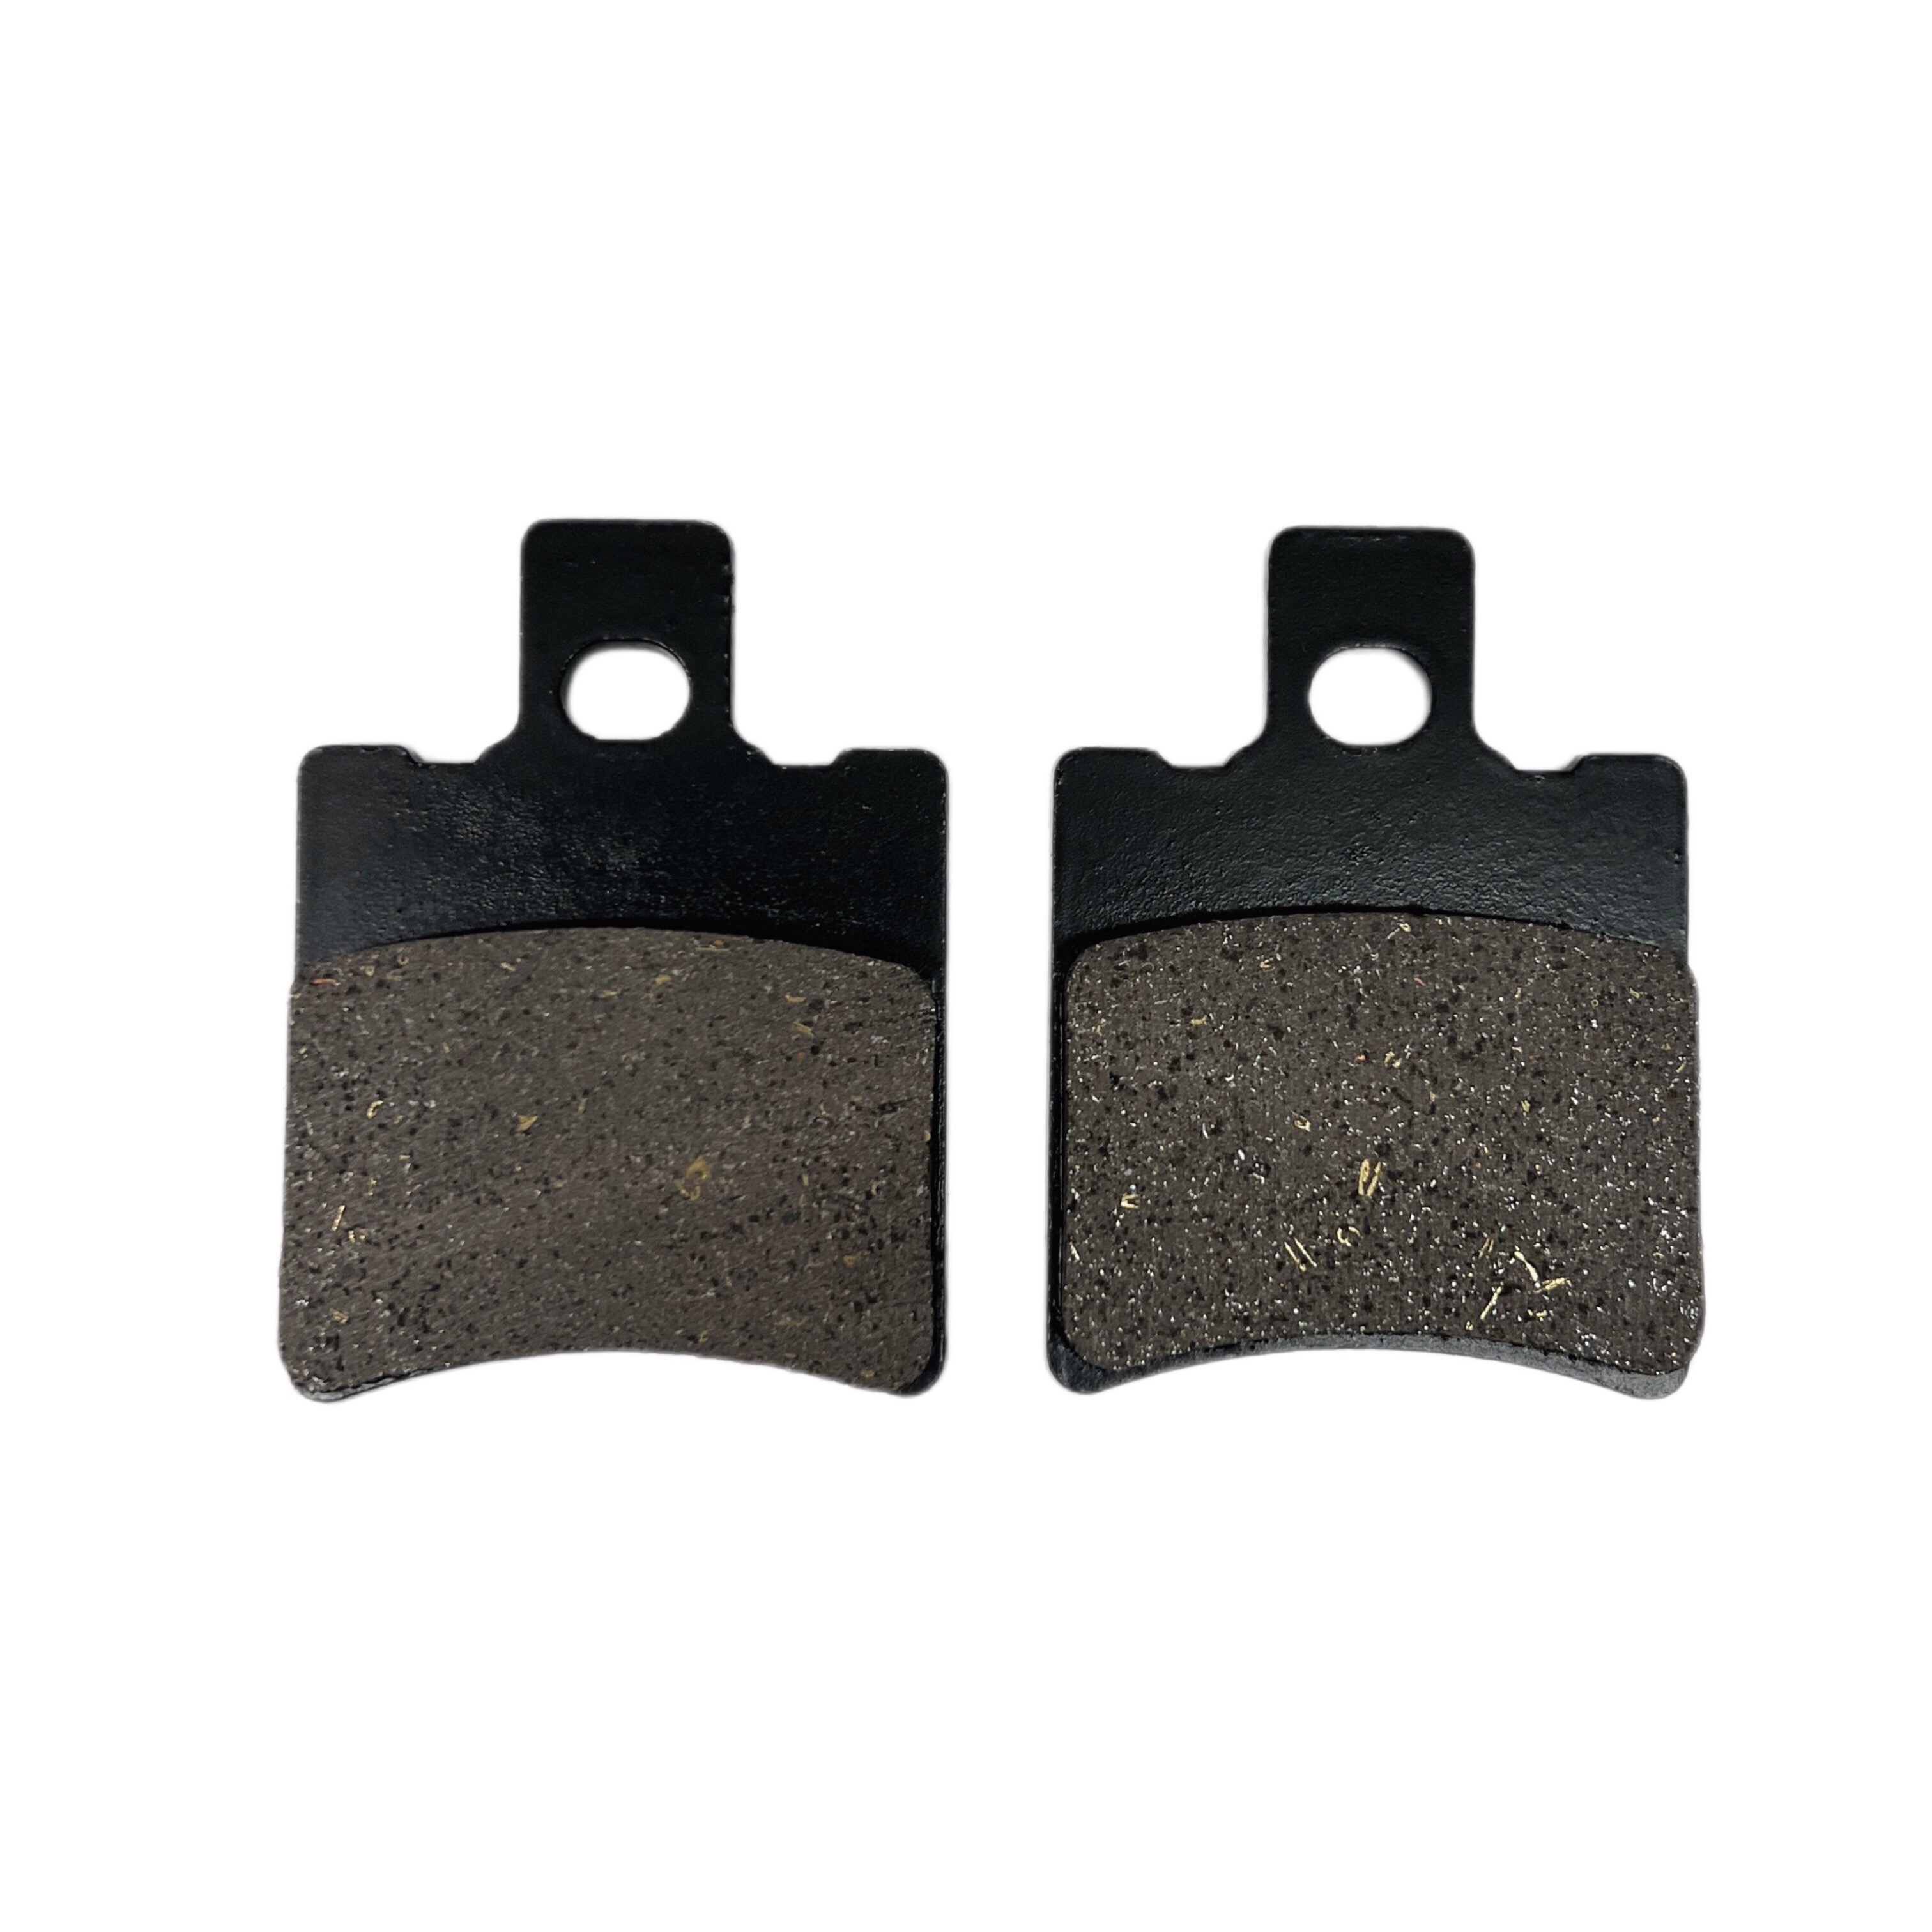 Brake Pads - GY6 Scooter